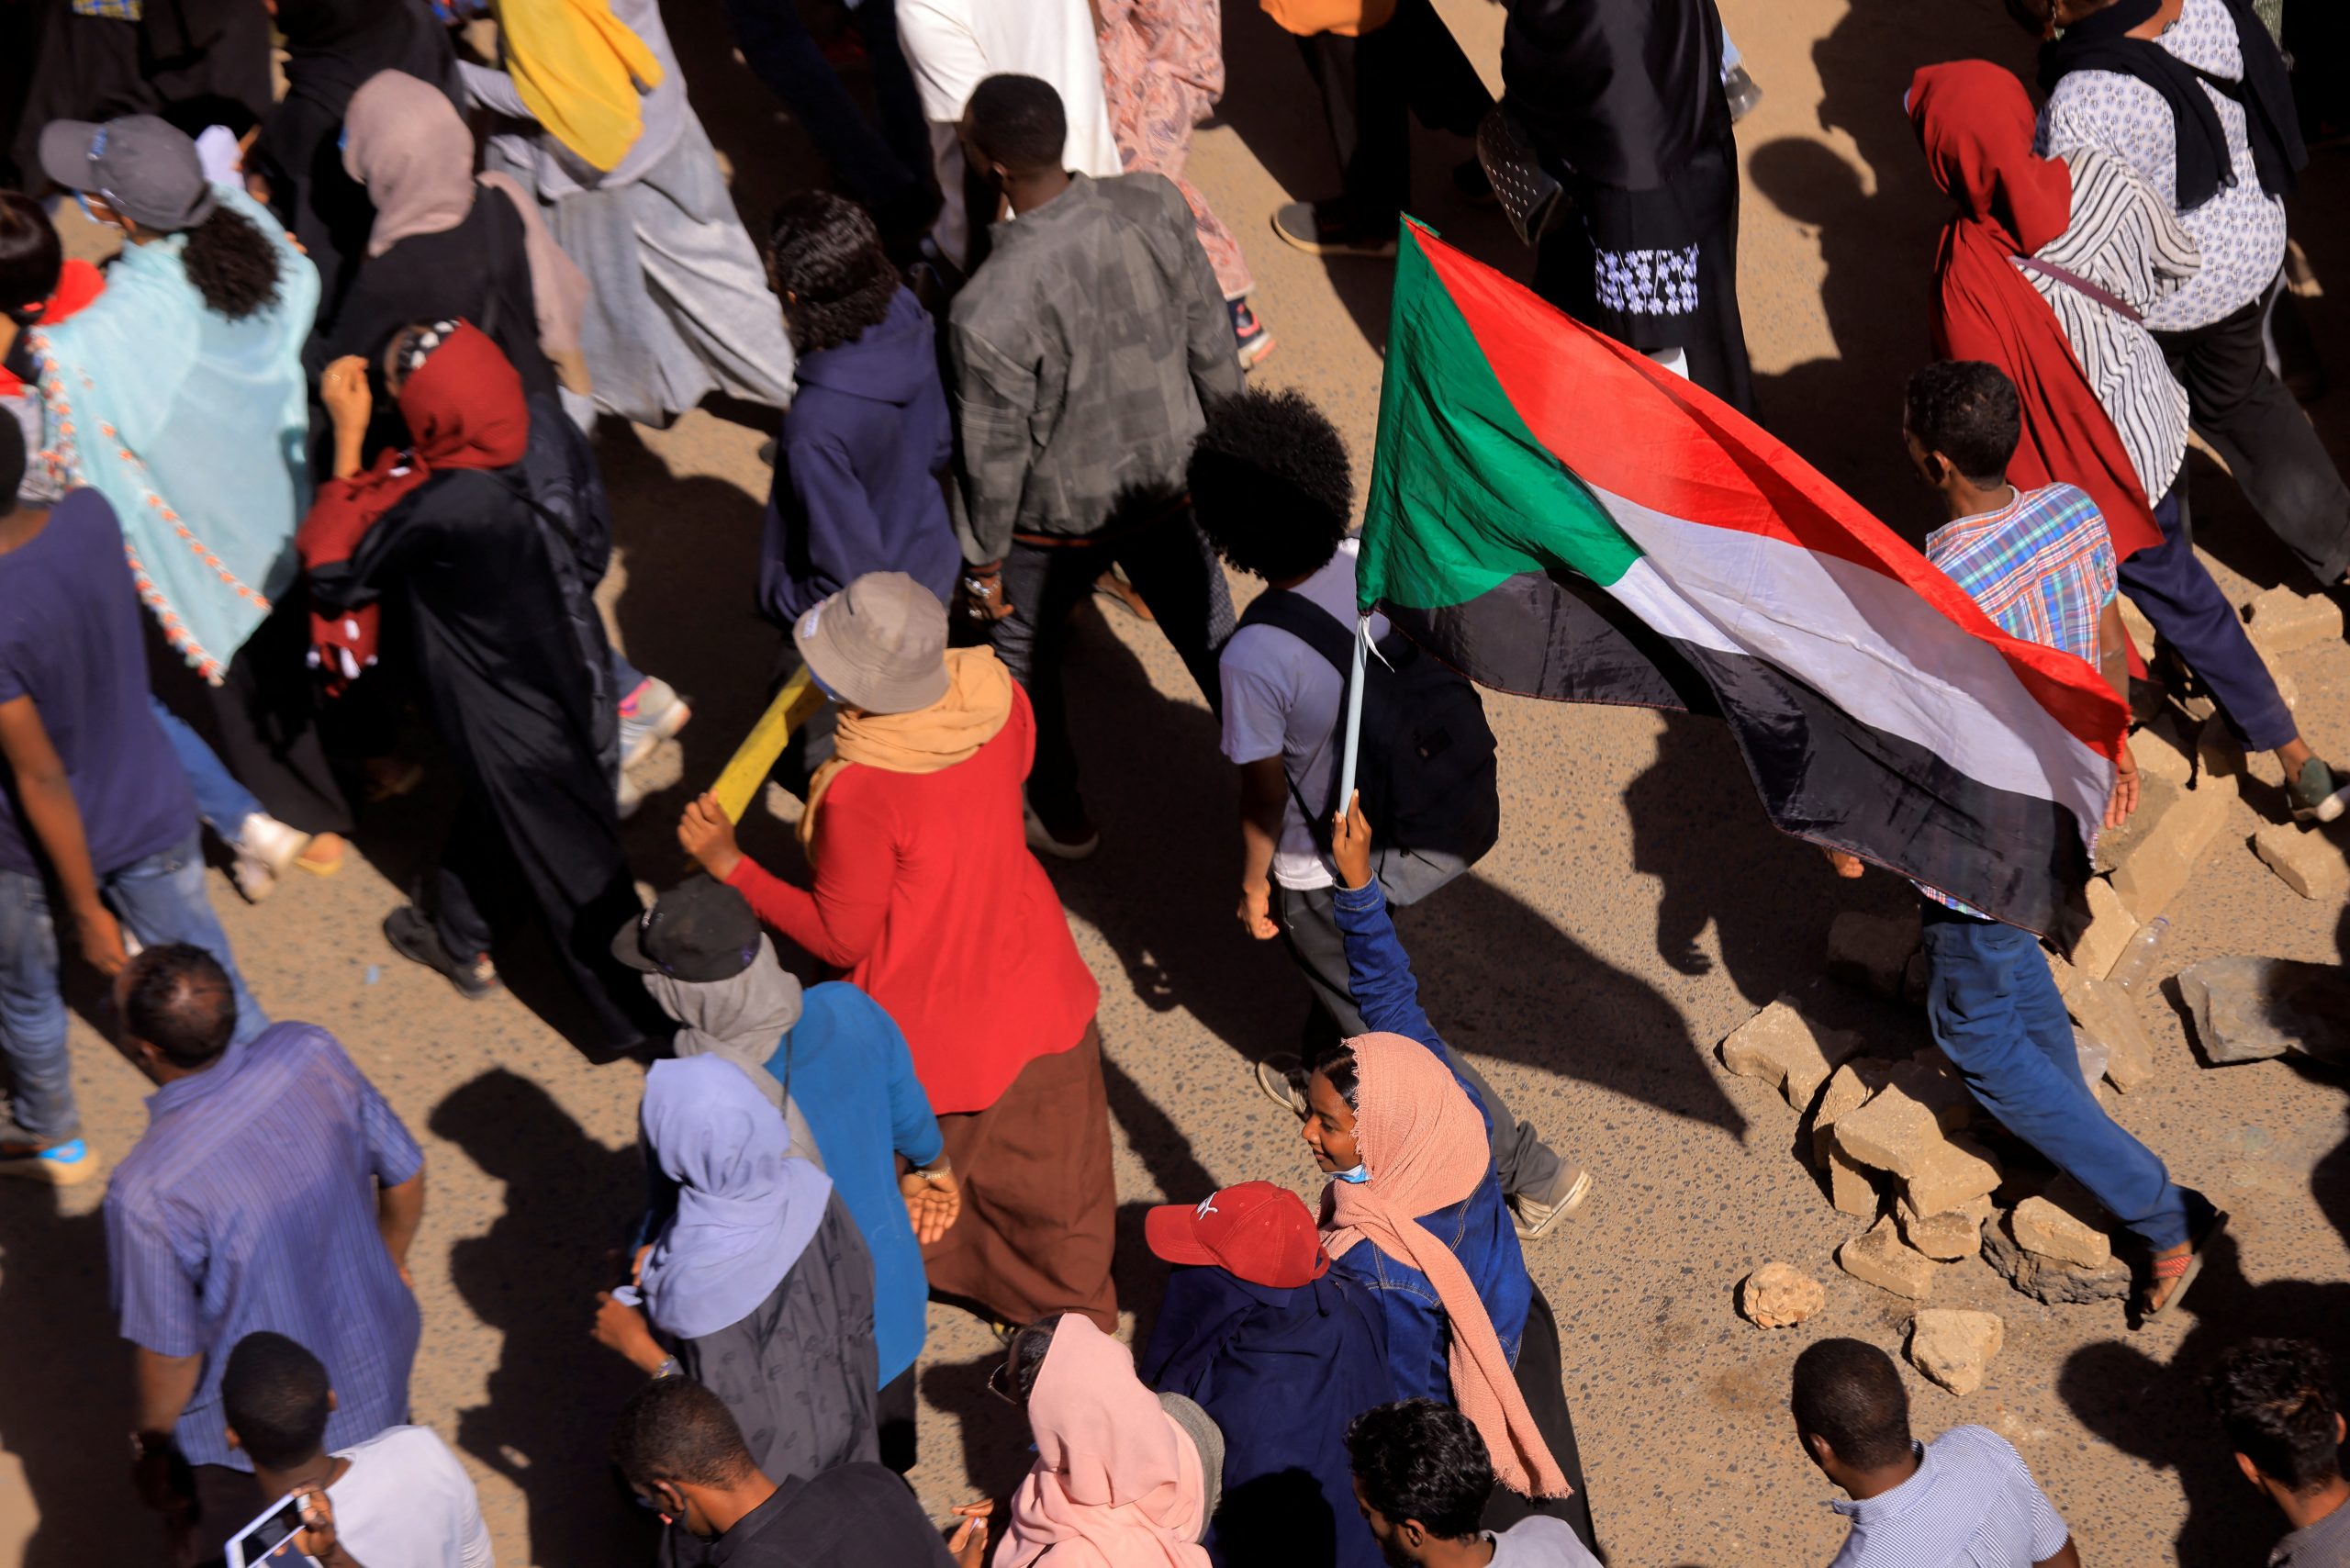 UN Expert Urged to Address Ongoing Extrajudicial Executions in Sudan